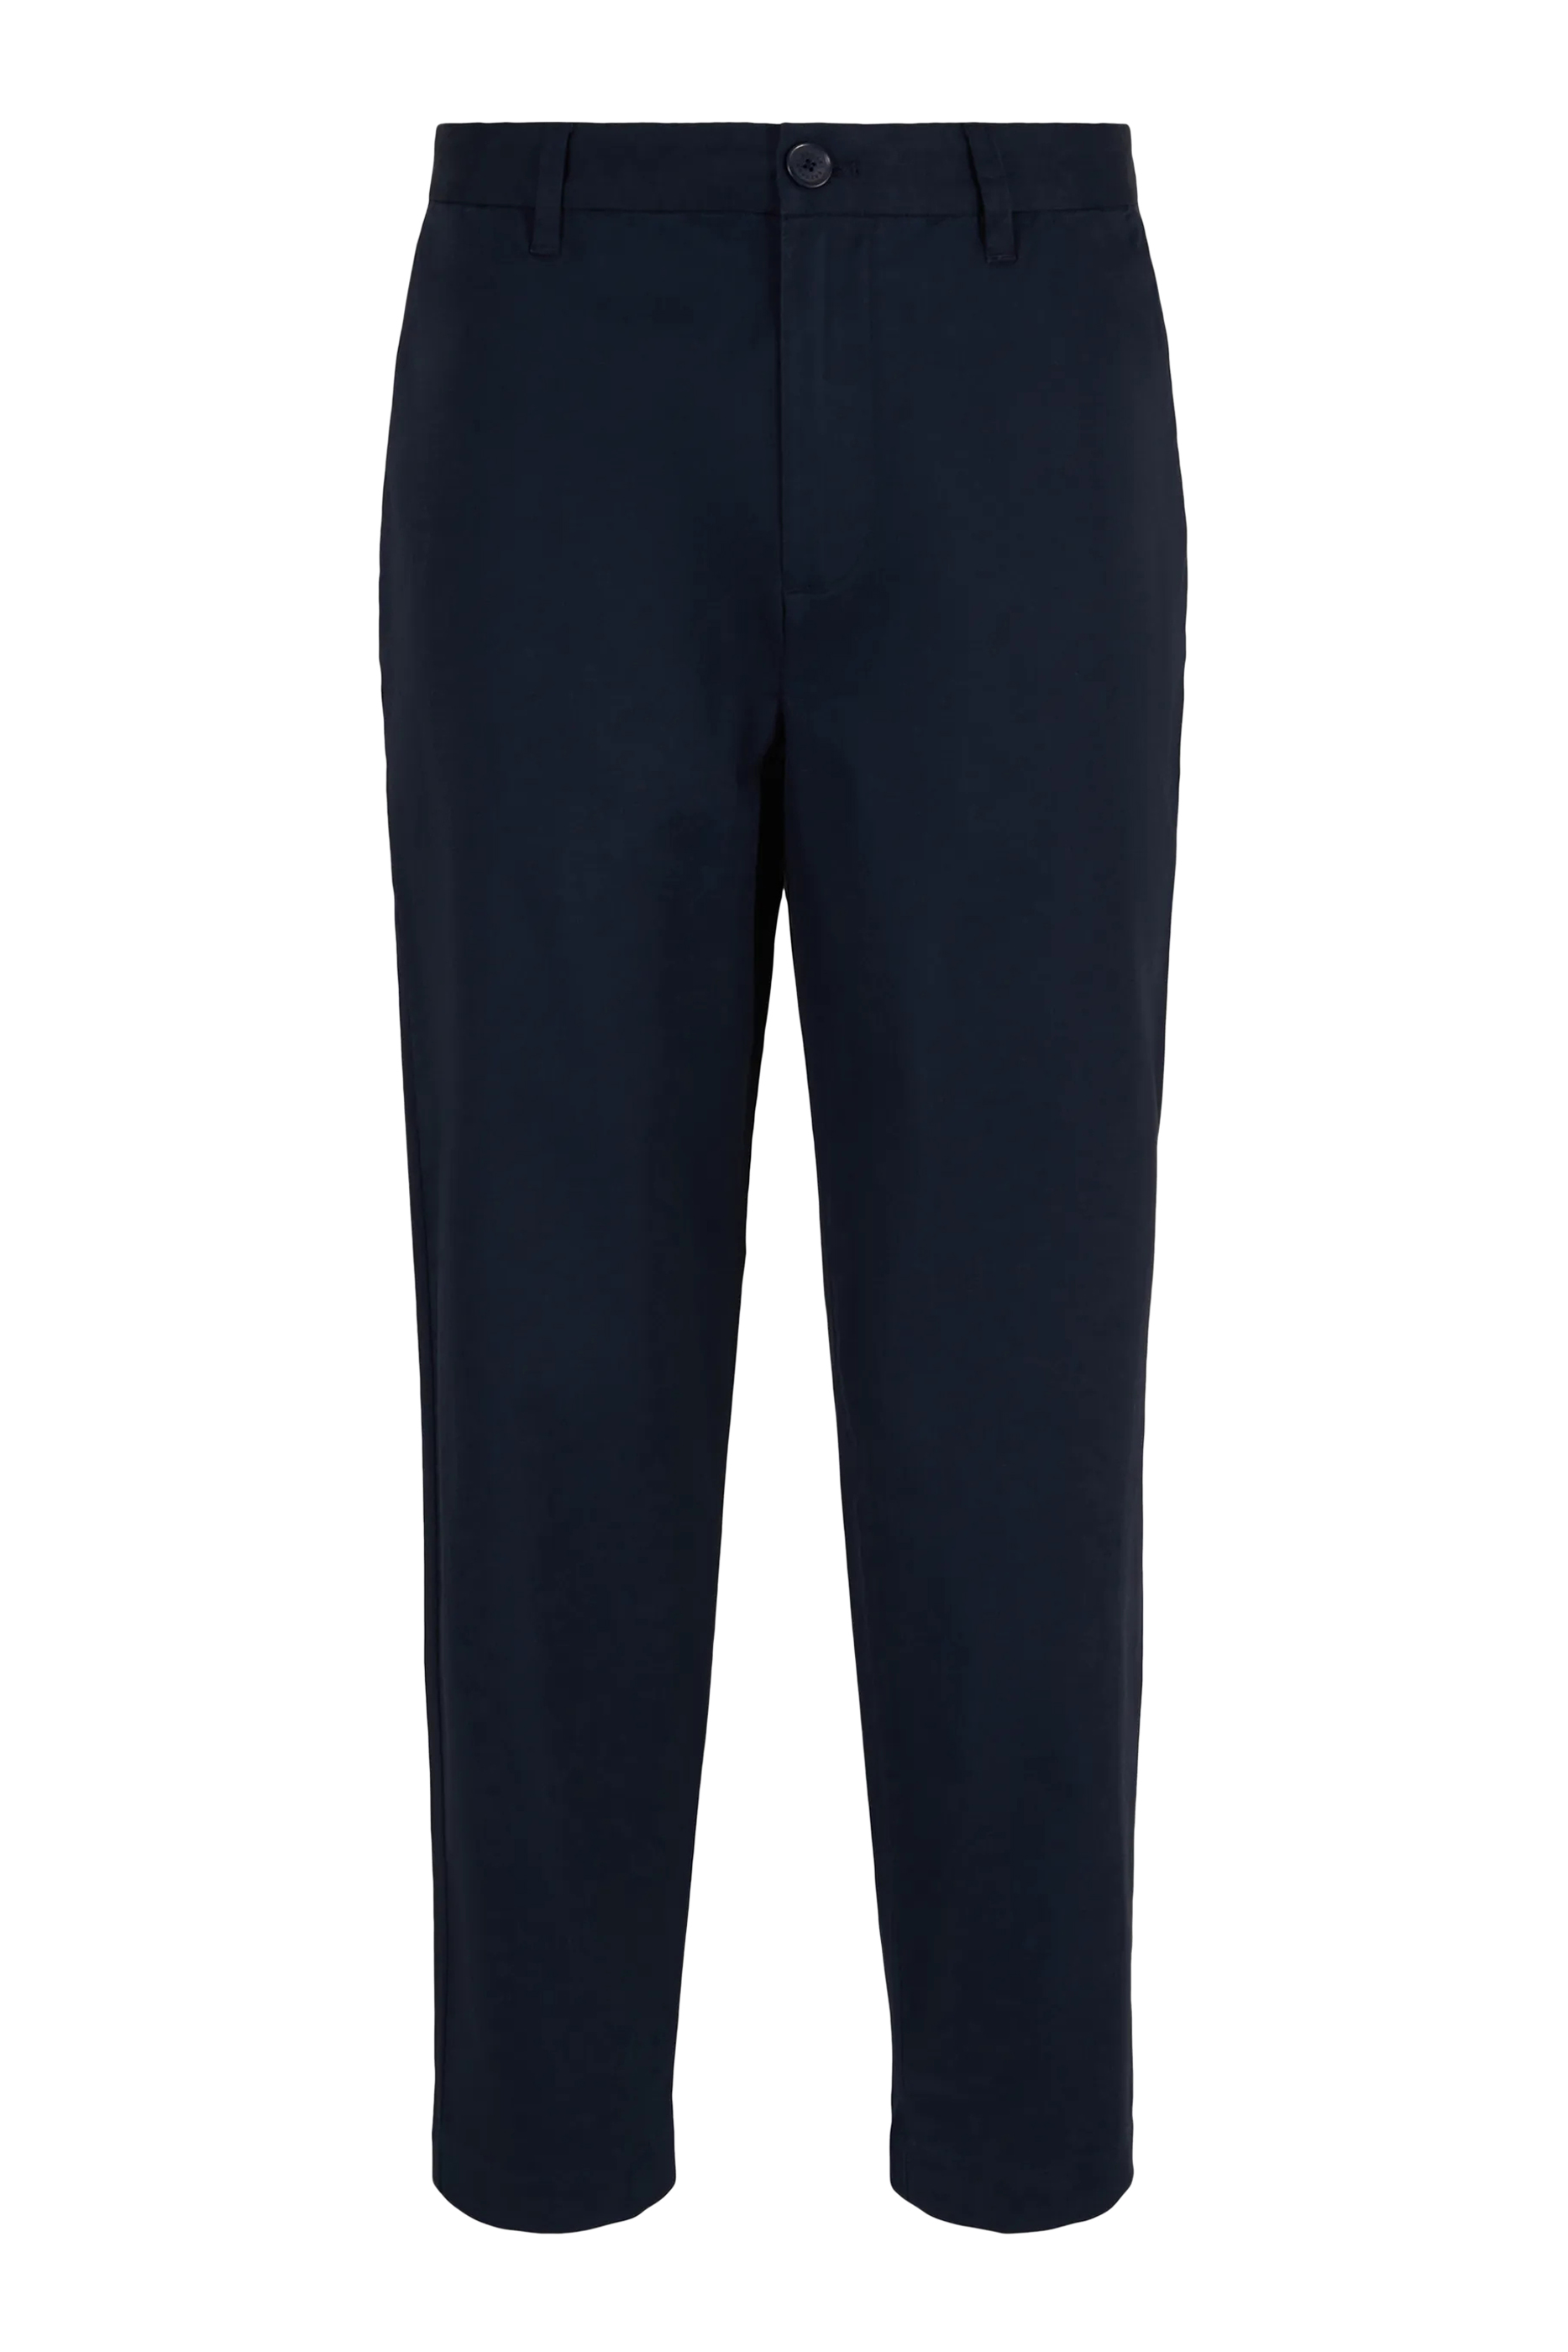 Buy Armani Exchange Milano Edition Formal Trousers for Mens ...